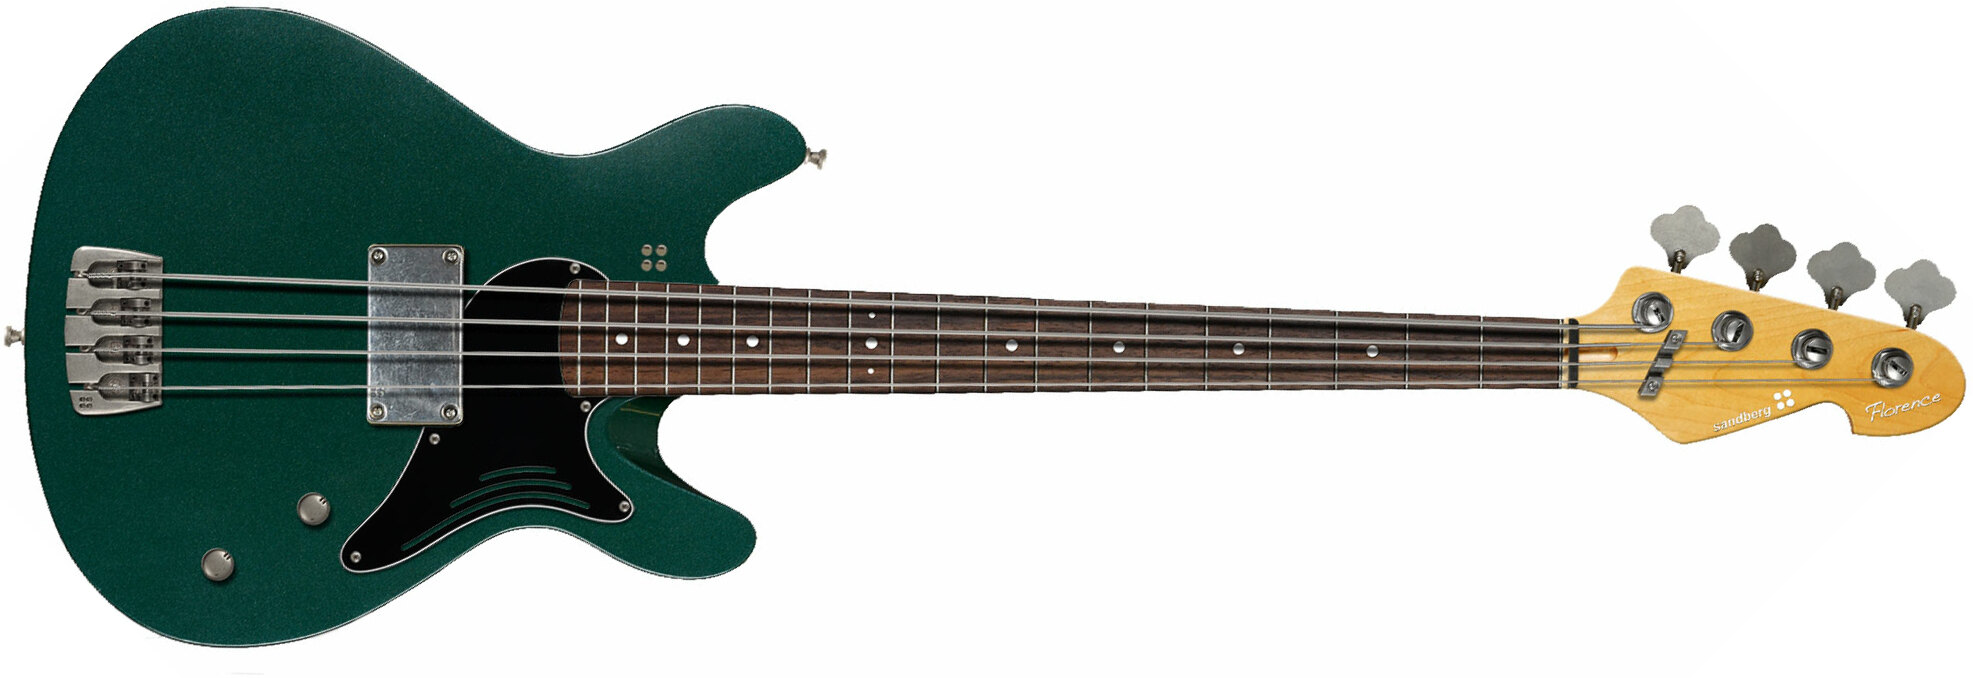 Sandberg Florence Bass 4c Rw - Soft Aged British Green - Solid body electric bass - Main picture